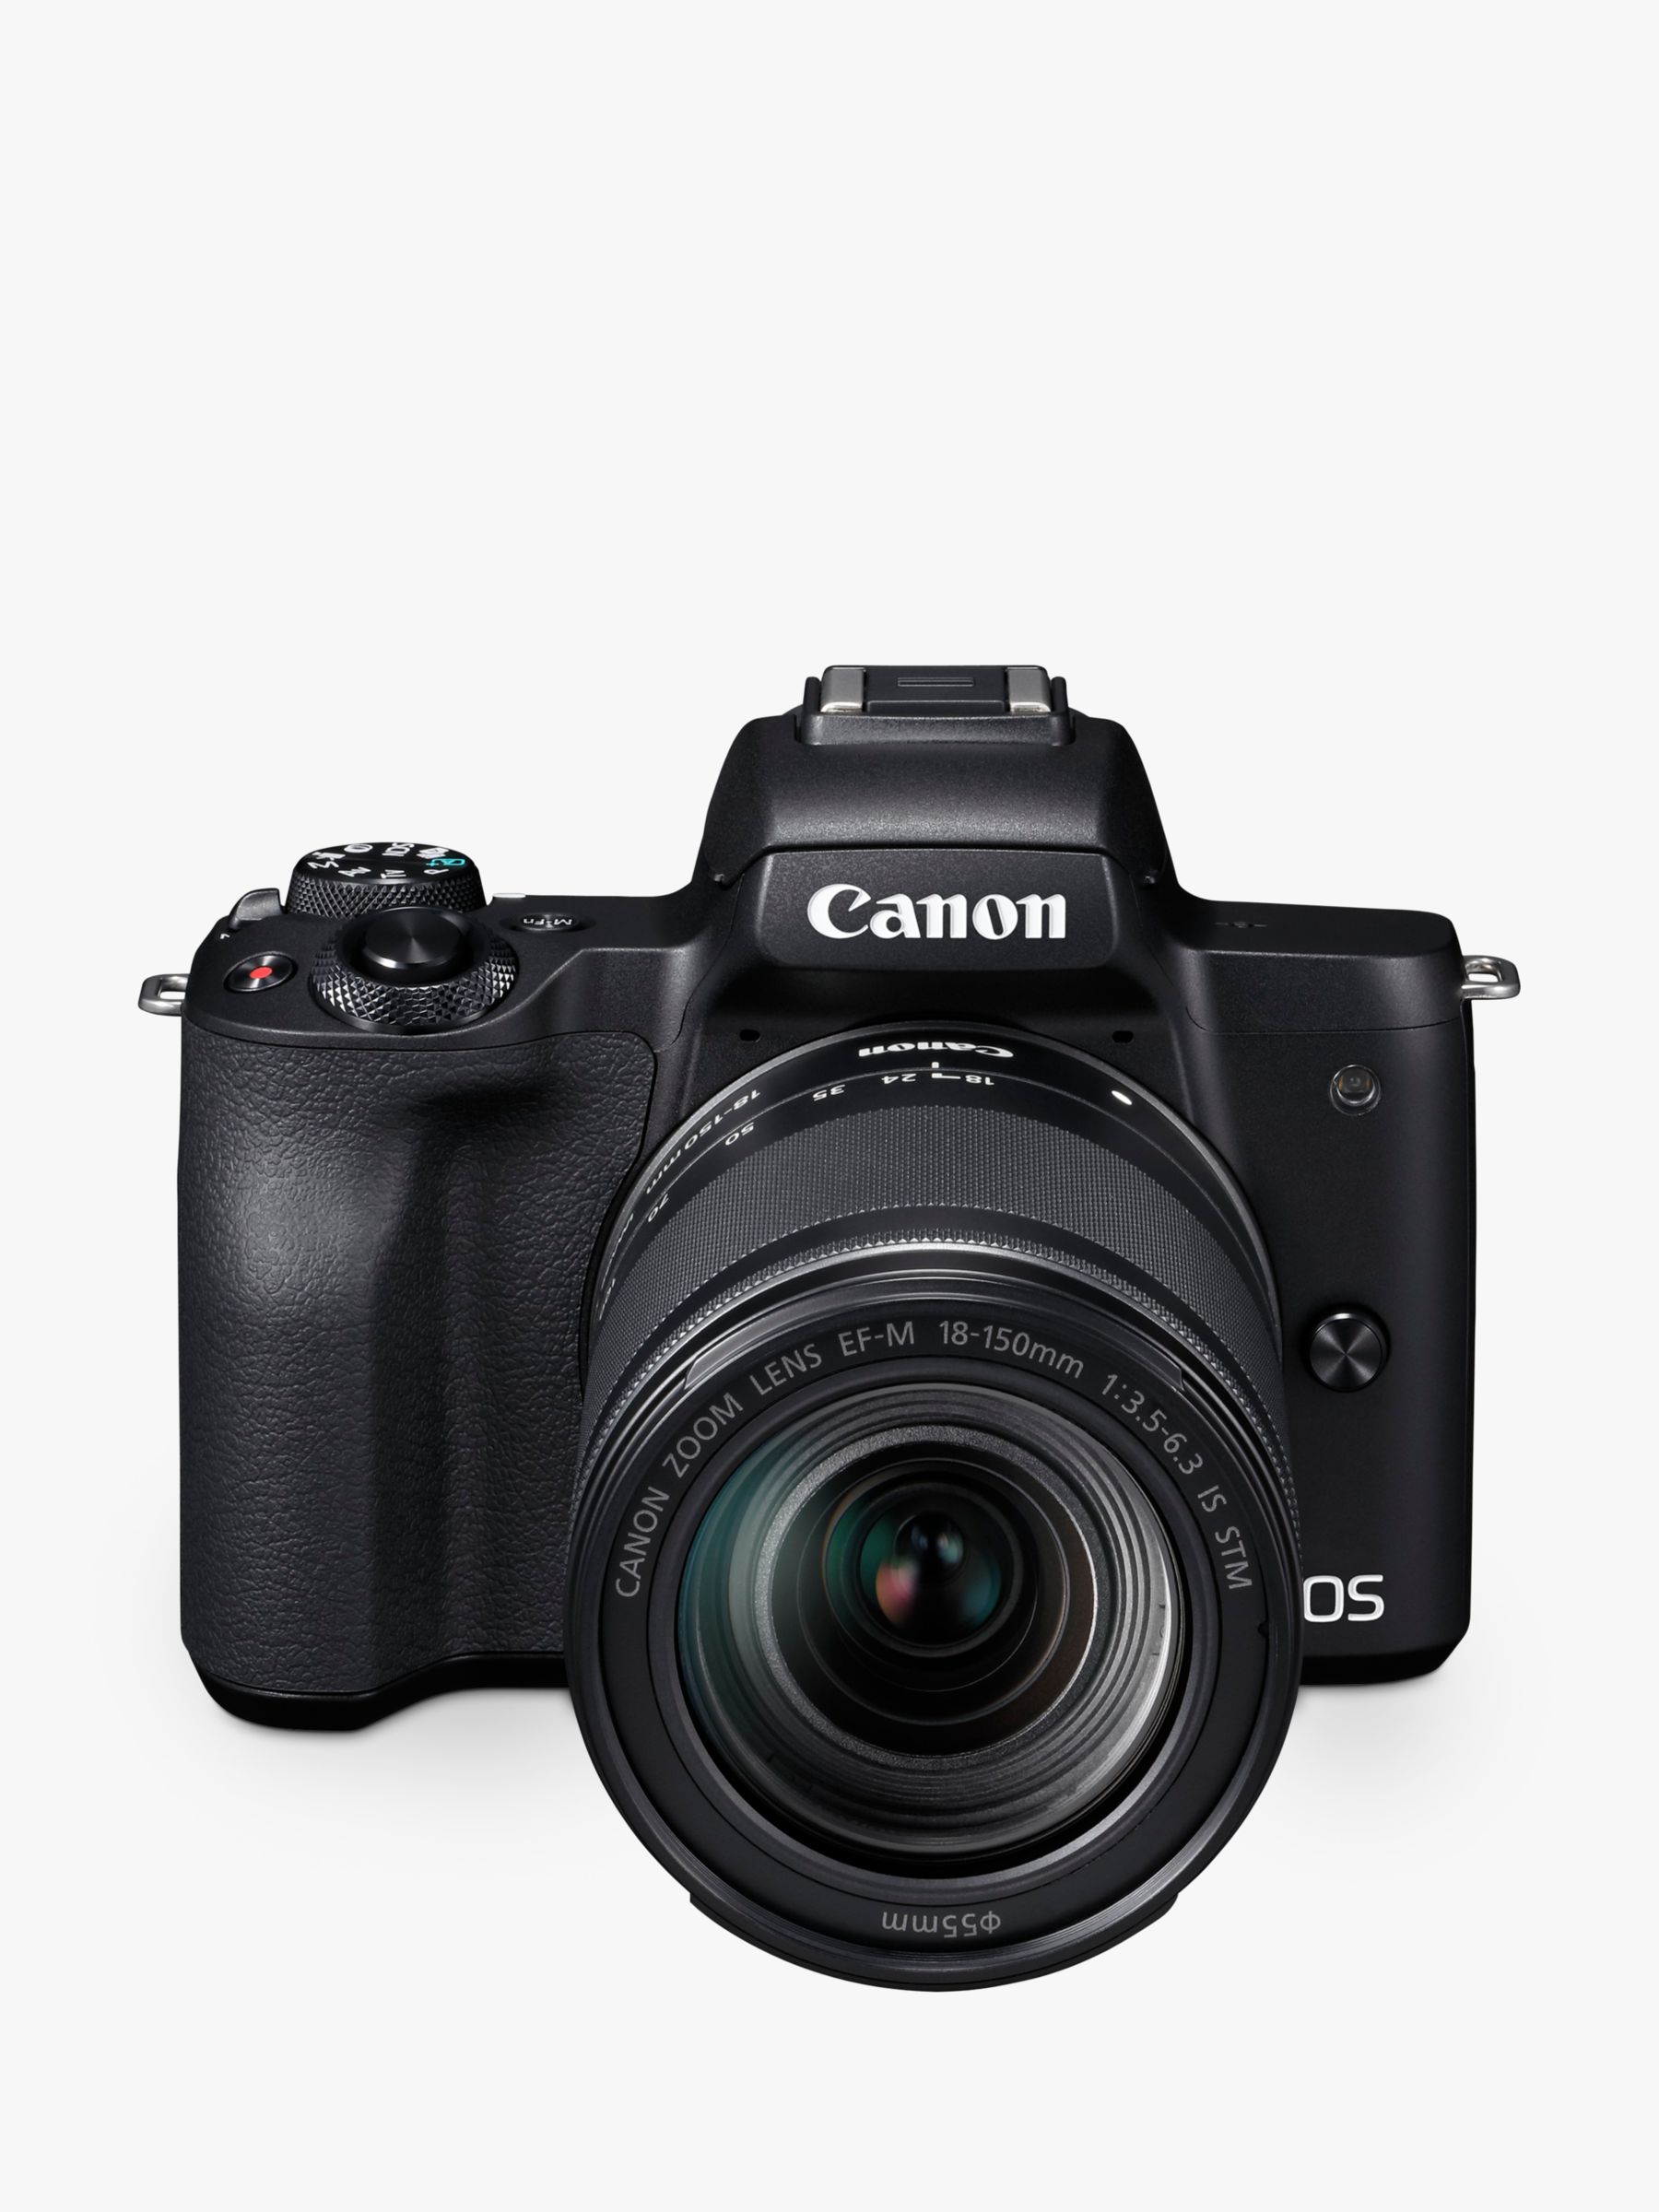 Image of Canon EOS M50 Compact System Camera with EFM 18150mm f3563 IS STM lens 4K Ultra HD 241MP WiFi Bluetooth NFC OLED EVF 3 VariAngle Touch Screen